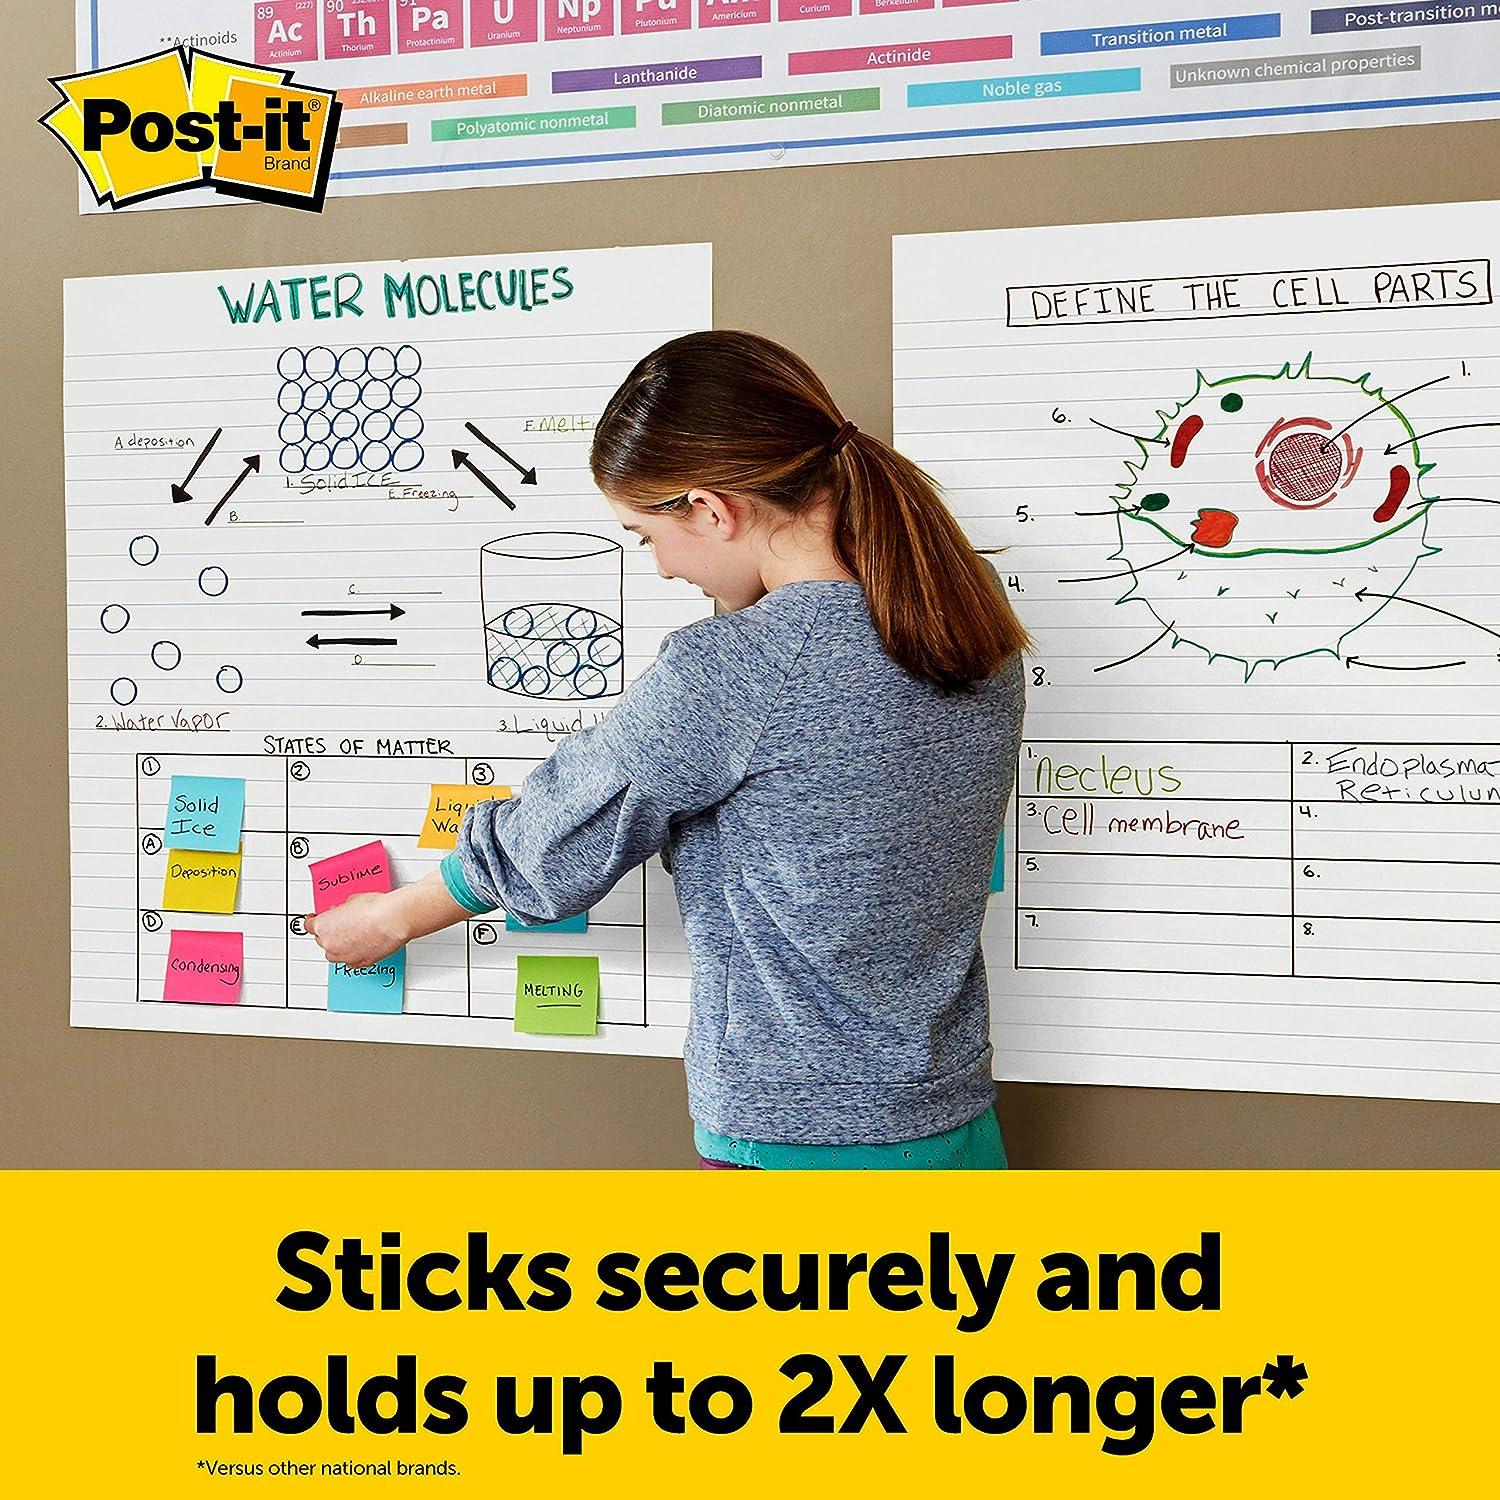 Post-it Super Sticky Easel Pad, Great for Virtual Teachers and